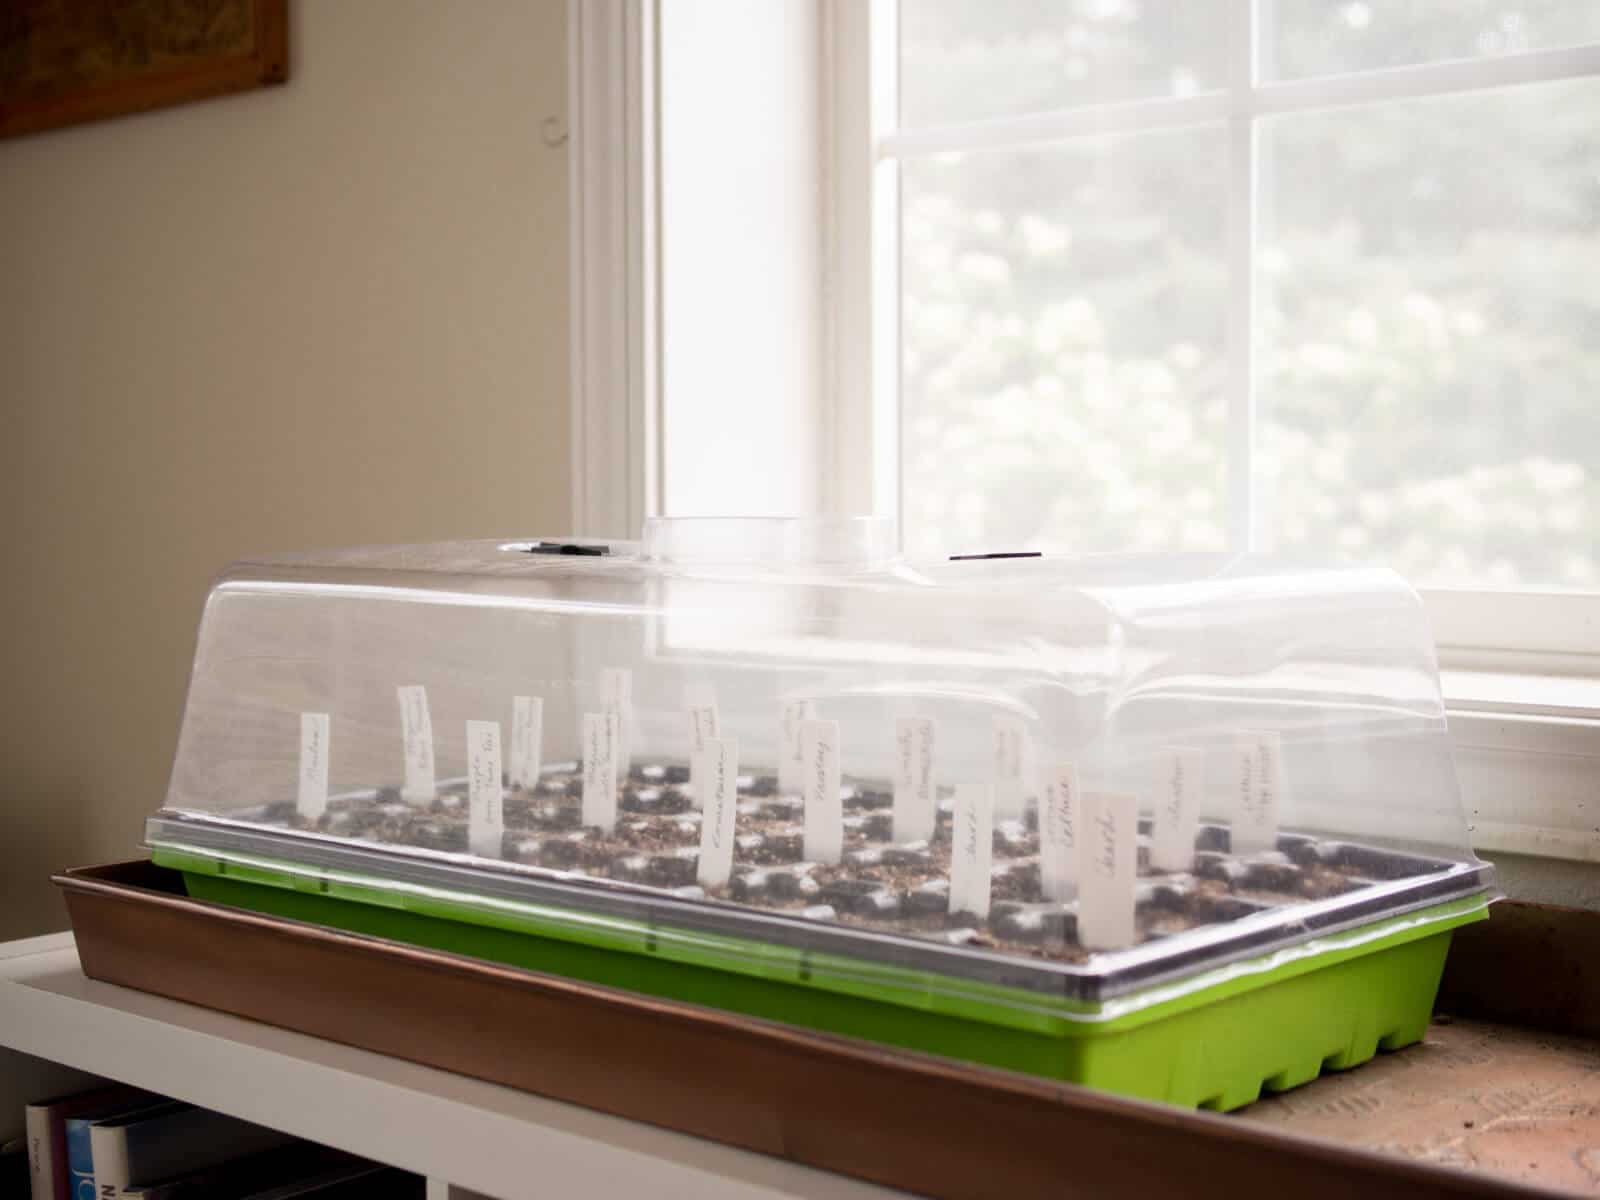 Place a ventilated humidity dome over the seed tray to aid in germination